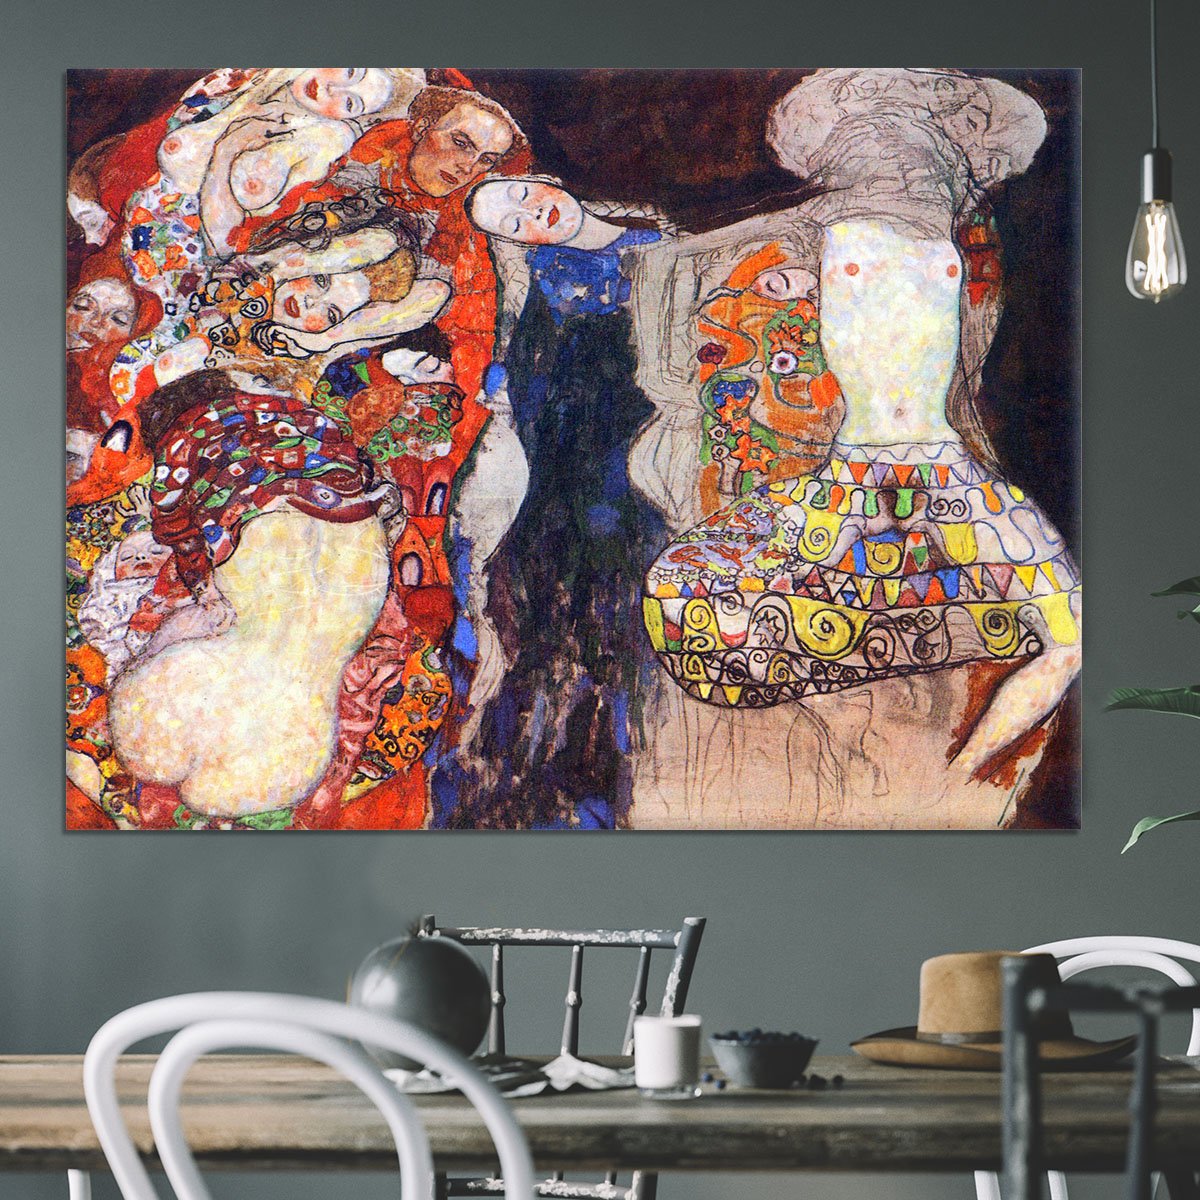 adorn the bride with veil and wreath by Klimt Canvas Print or Poster